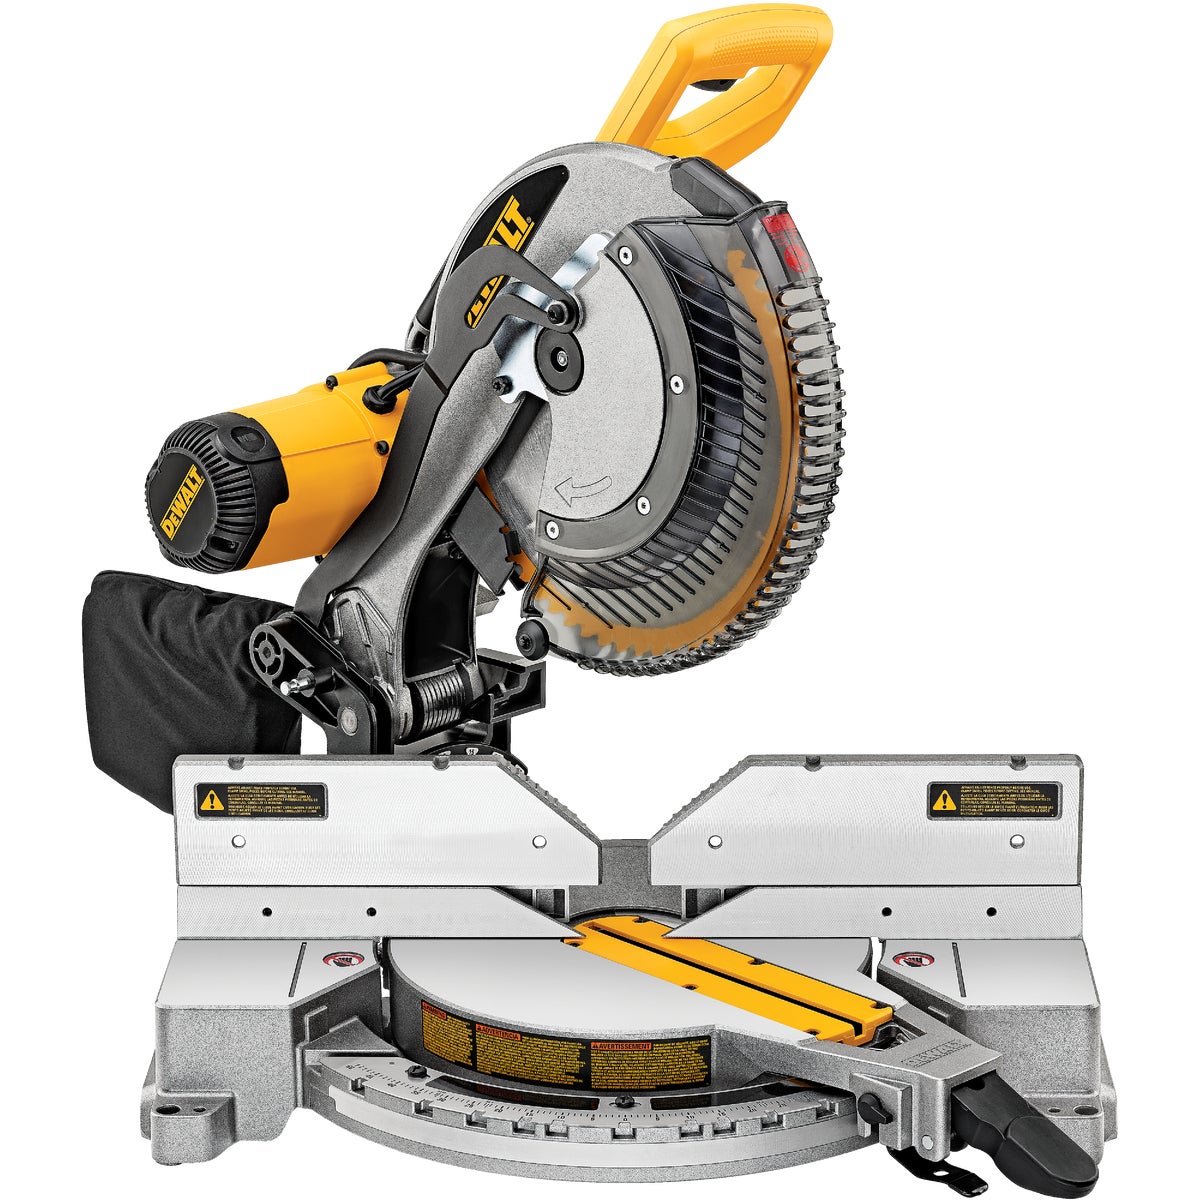 Genesis 10 In. 15-Amp Compound Miter Saw with Laser Guide - Crafty